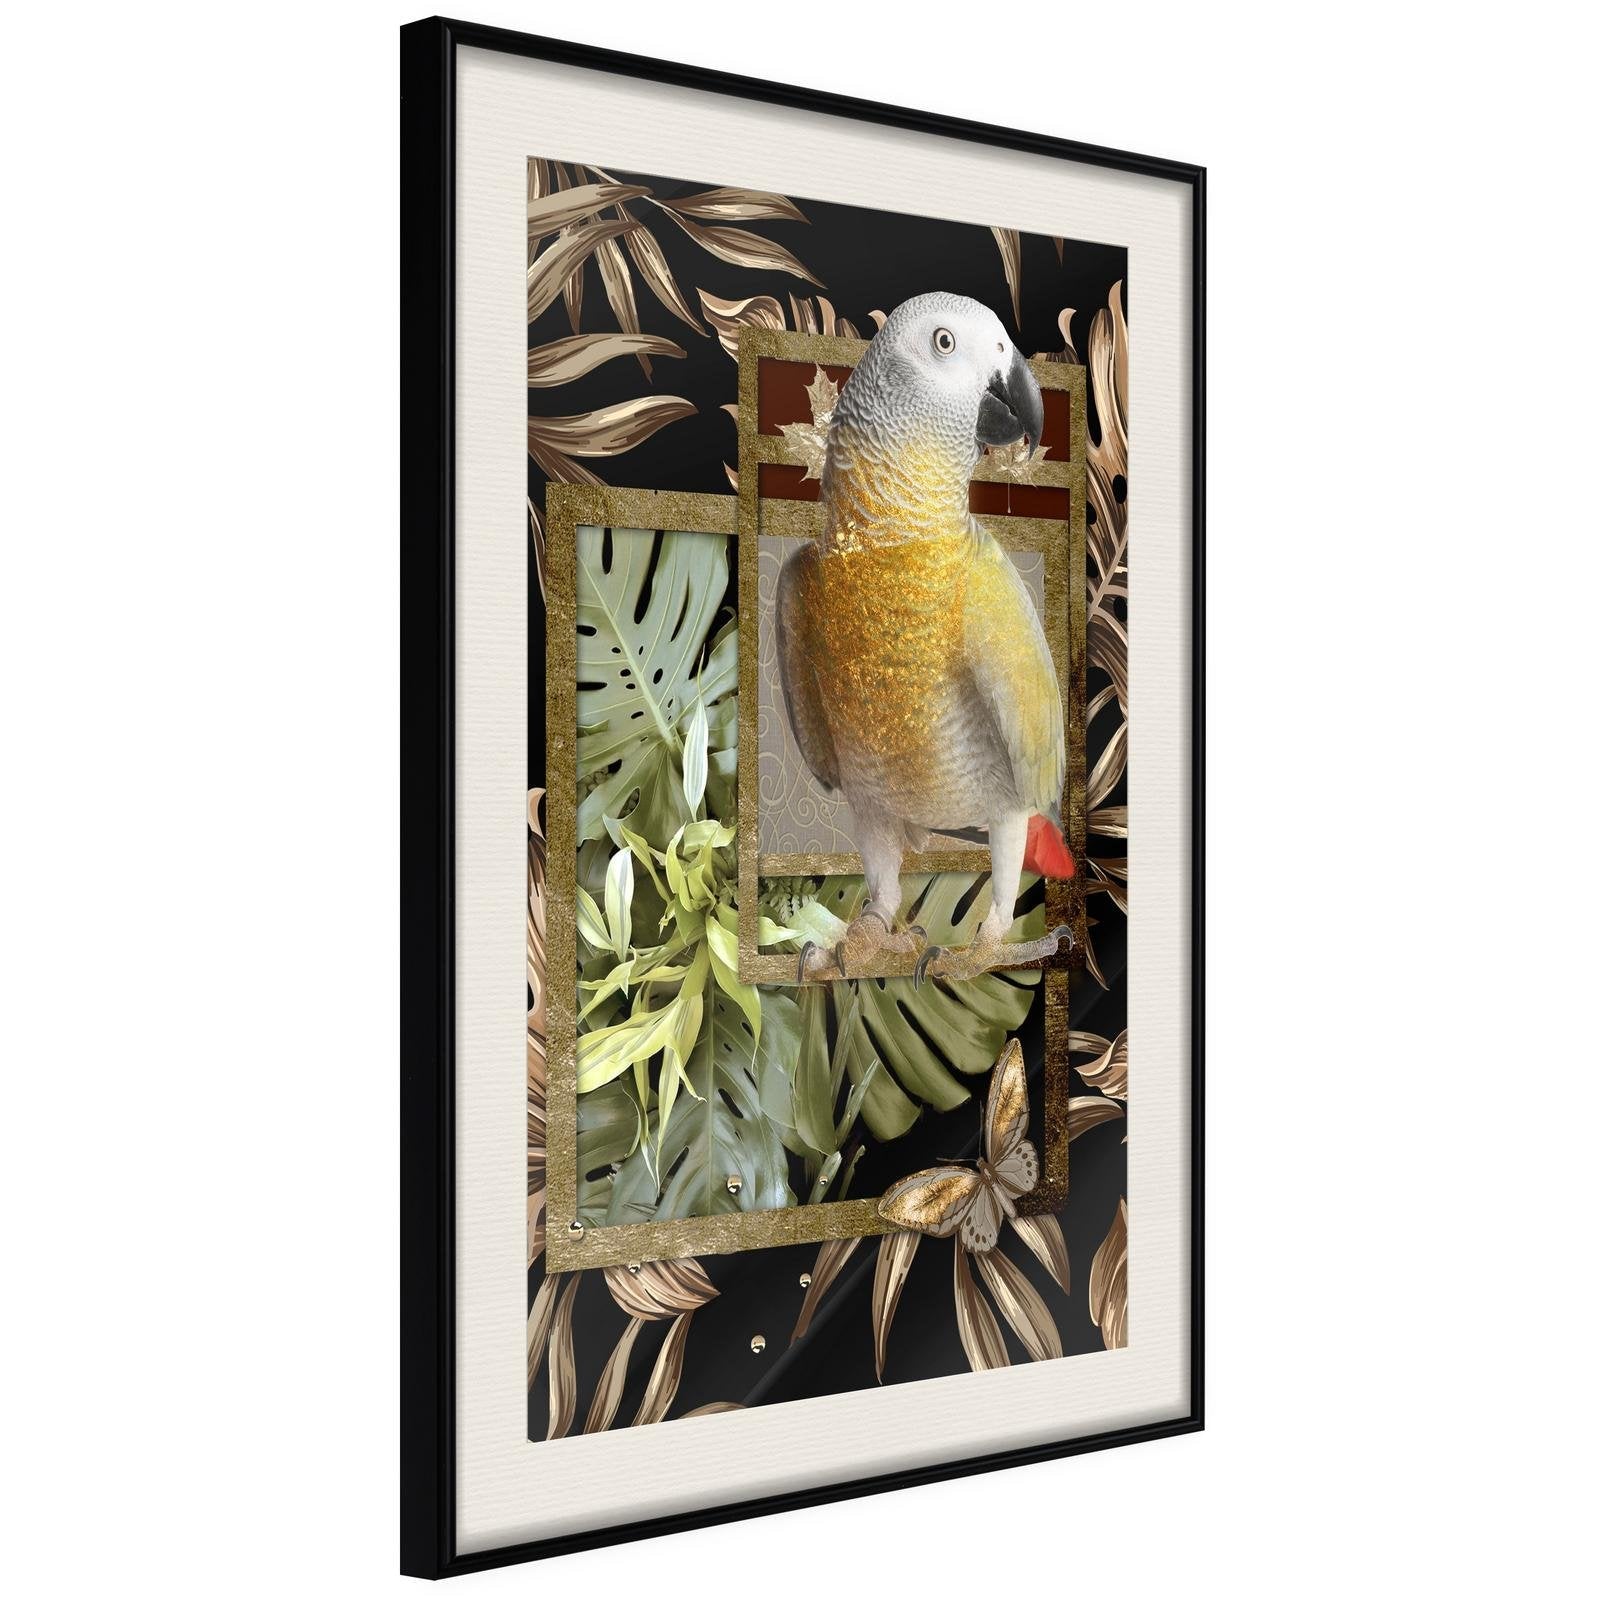 Inramad Poster / Tavla - Composition with Gold Parrot-Poster Inramad-Artgeist-20x30-Svart ram med passepartout-peaceofhome.se